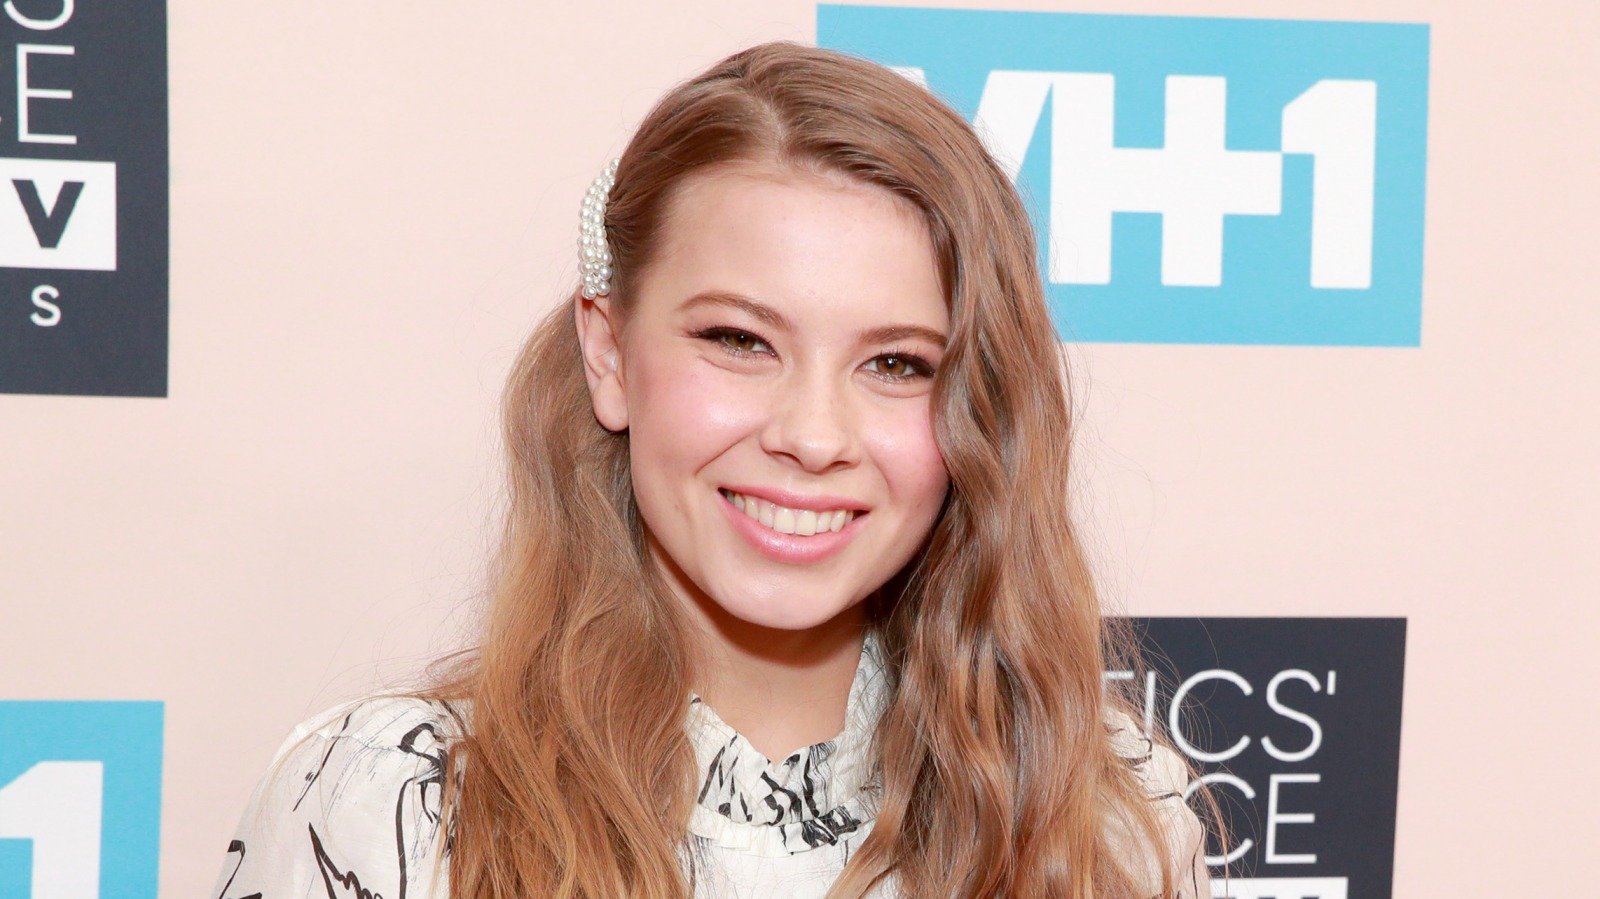 Things About Bindi Irwin's Pregnancy You Don't Know